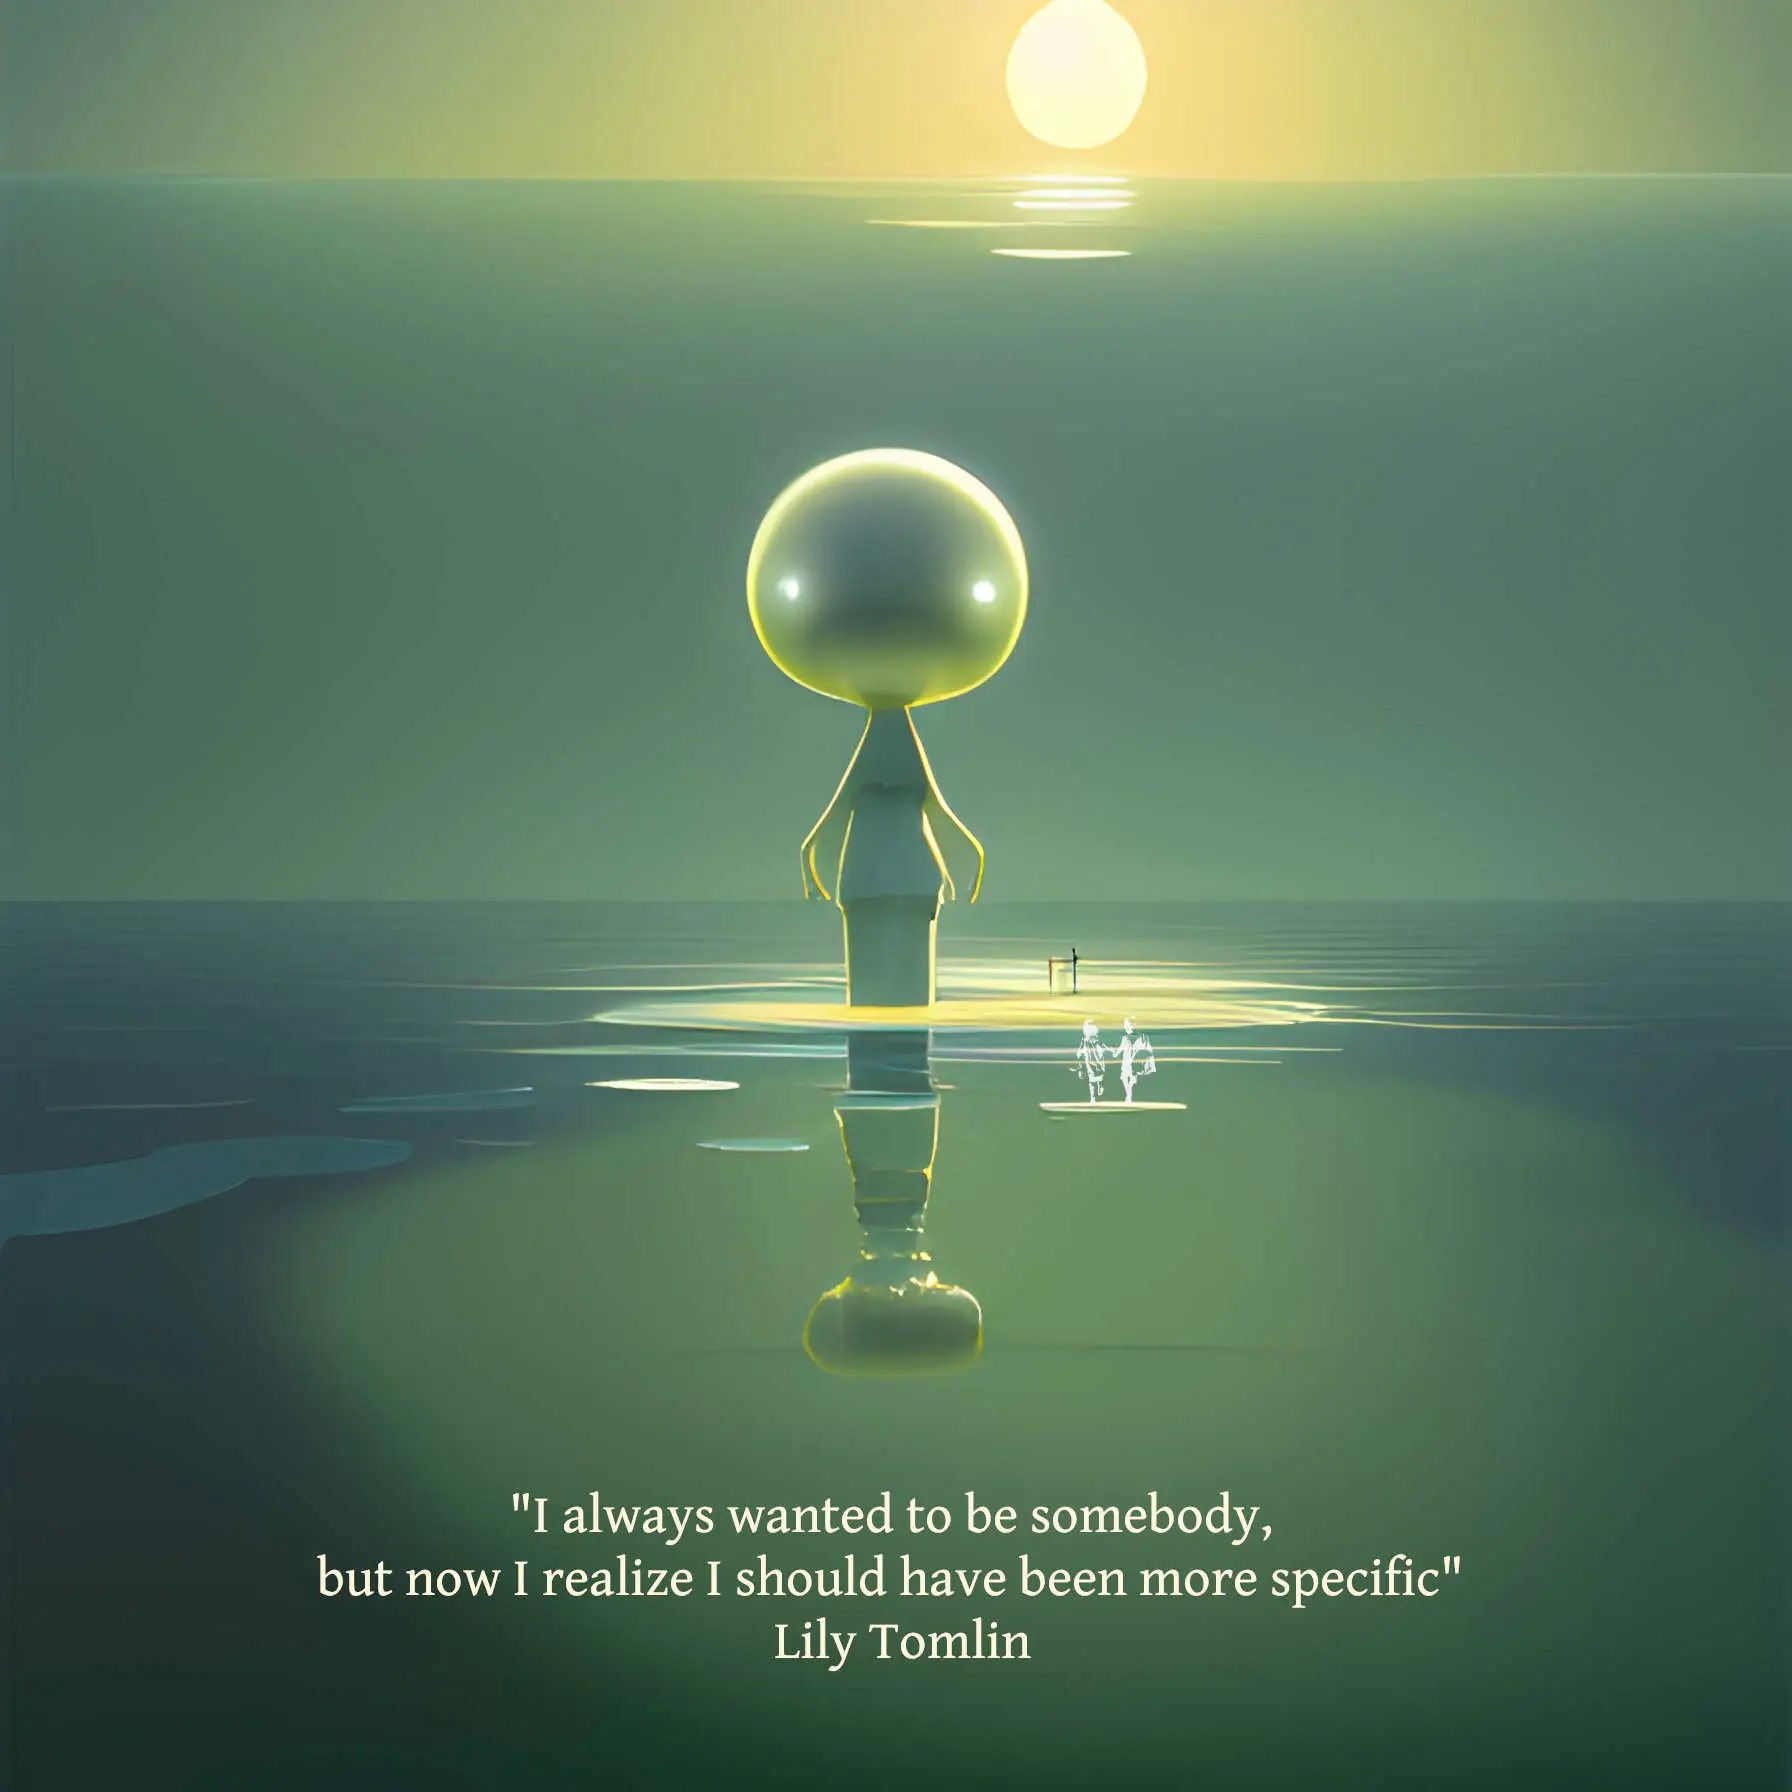 An odd, giant green creature stands up to her kness in calm reflecting water. In front of her is a horizon and above her is a second horizon with a sun setting, or rising. She could be facing either forward or backward. There appear to be two very small people, maybe, standing to her right. The whole scene is in an aquamarine-ish hue. Text reads: "I always wanted to be somebody, but now I realize I should have been more specific." Lily Tomlin